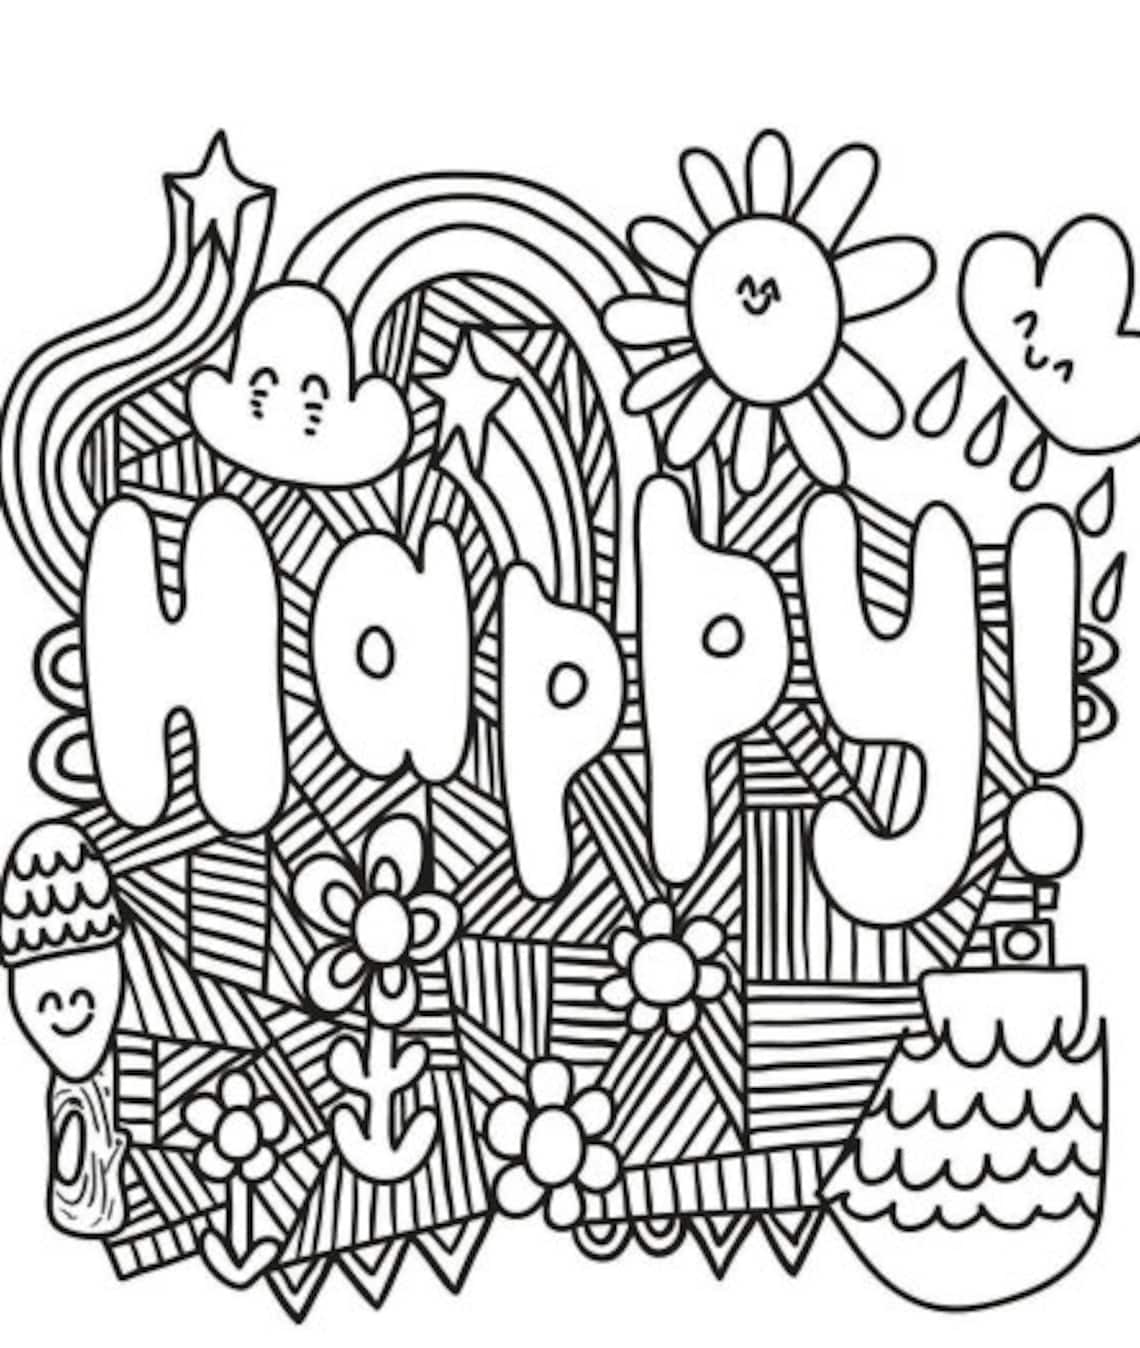 Coloring Pages Digital Download - Etsy